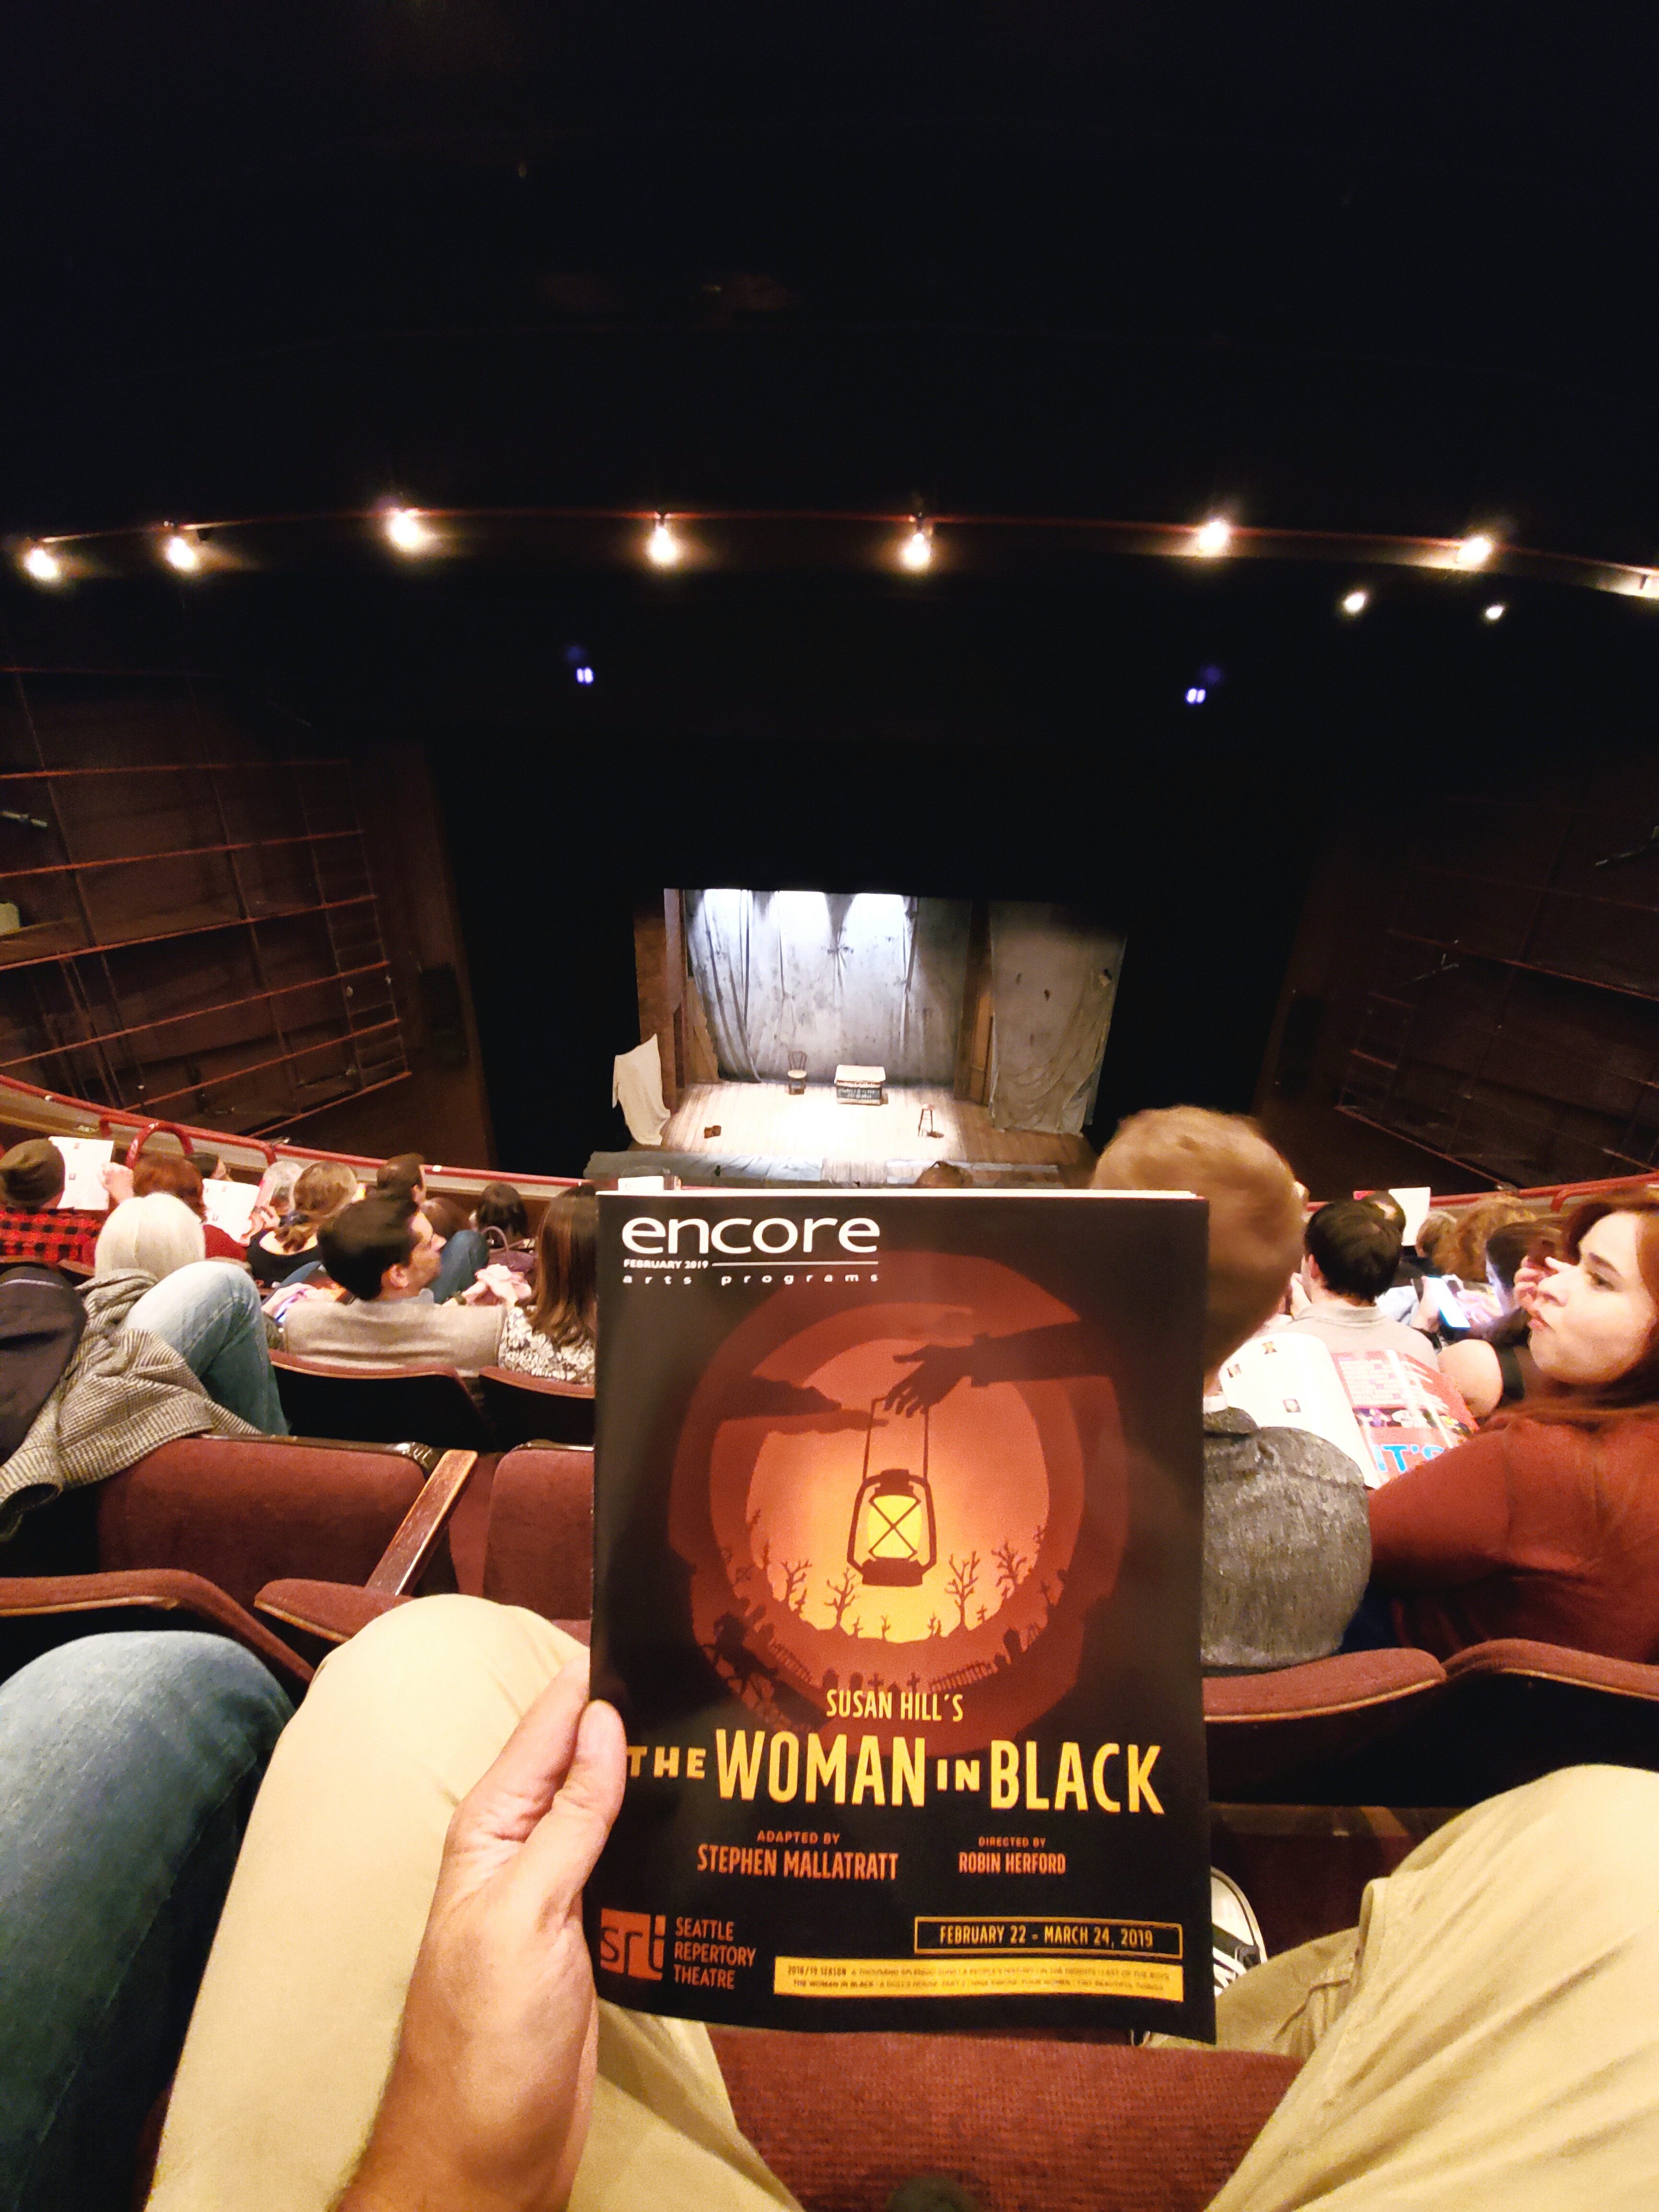 @WomanInBlack_UK #ghost #play at @SeattleRep. Slow start had me planning to leave at intermission but it morphed into a #chilling, #haunting, #edgeOfYourSeat #suspenseful, #spineTingling, #gothic #thriller. Great use of light, sound, & 2-person cast.